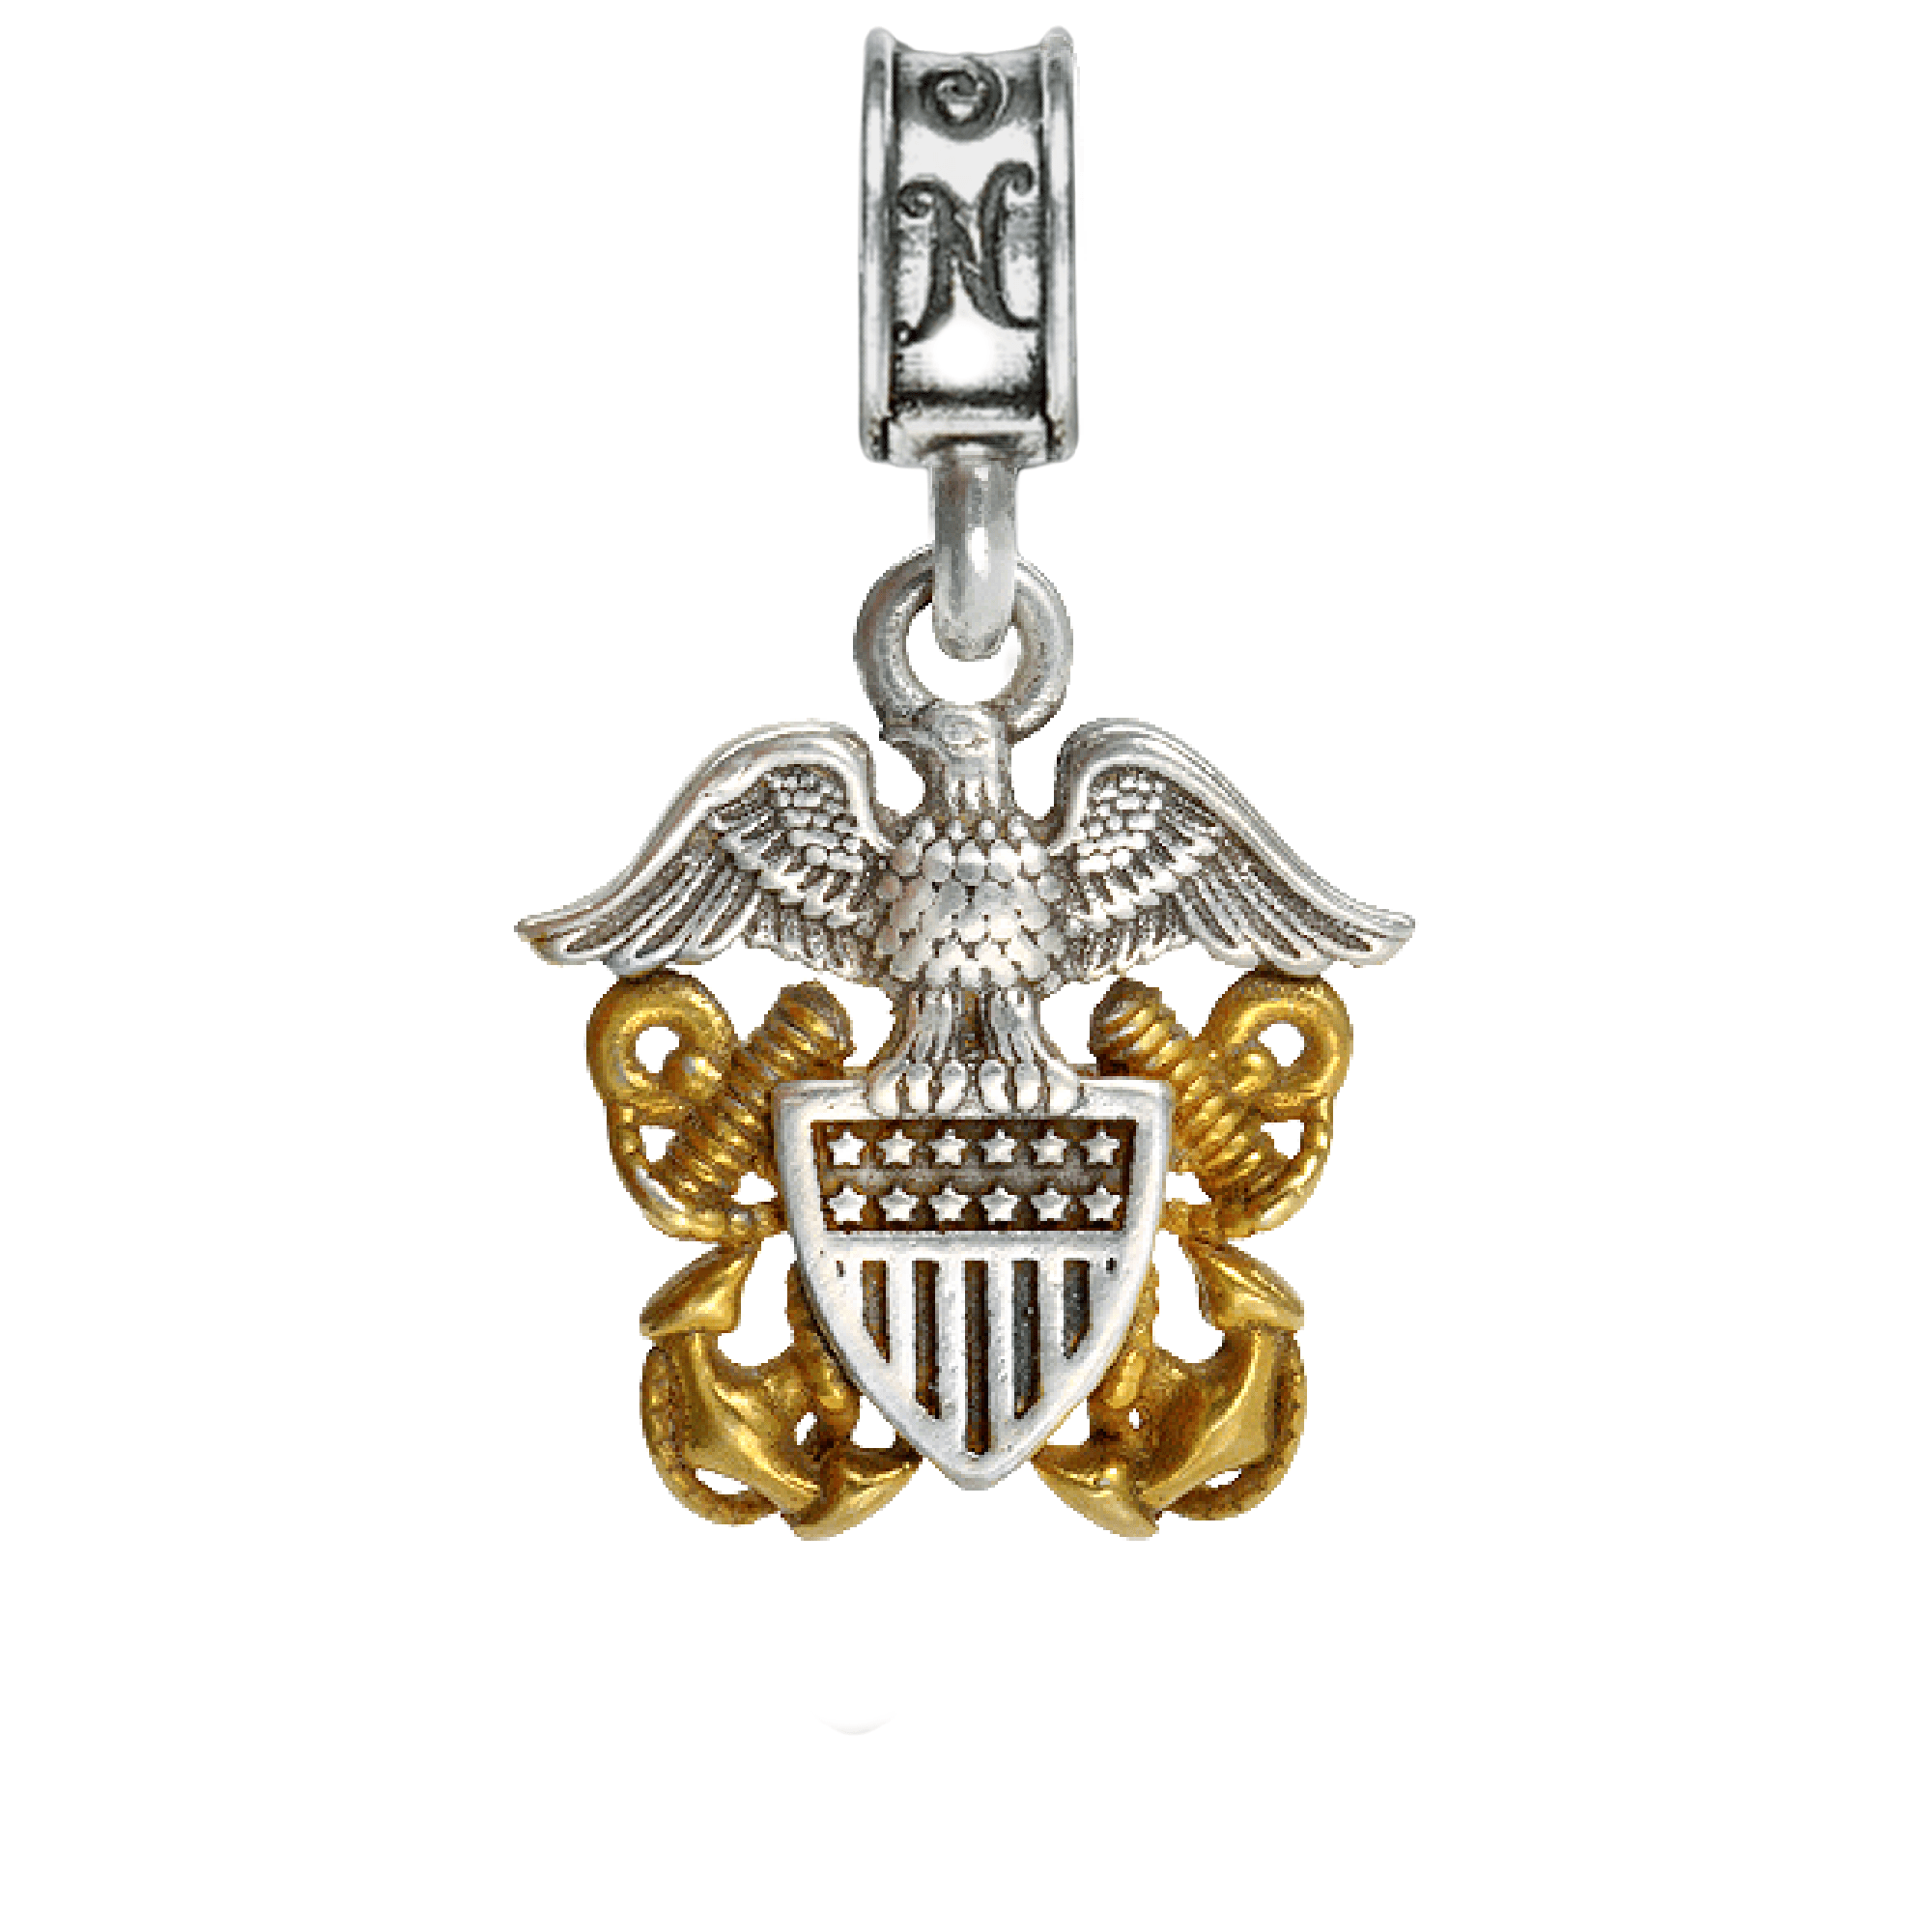 Military Jewelry, Military Charms, Navy, USN, Military Gifts, Navy Officer Crest Charm